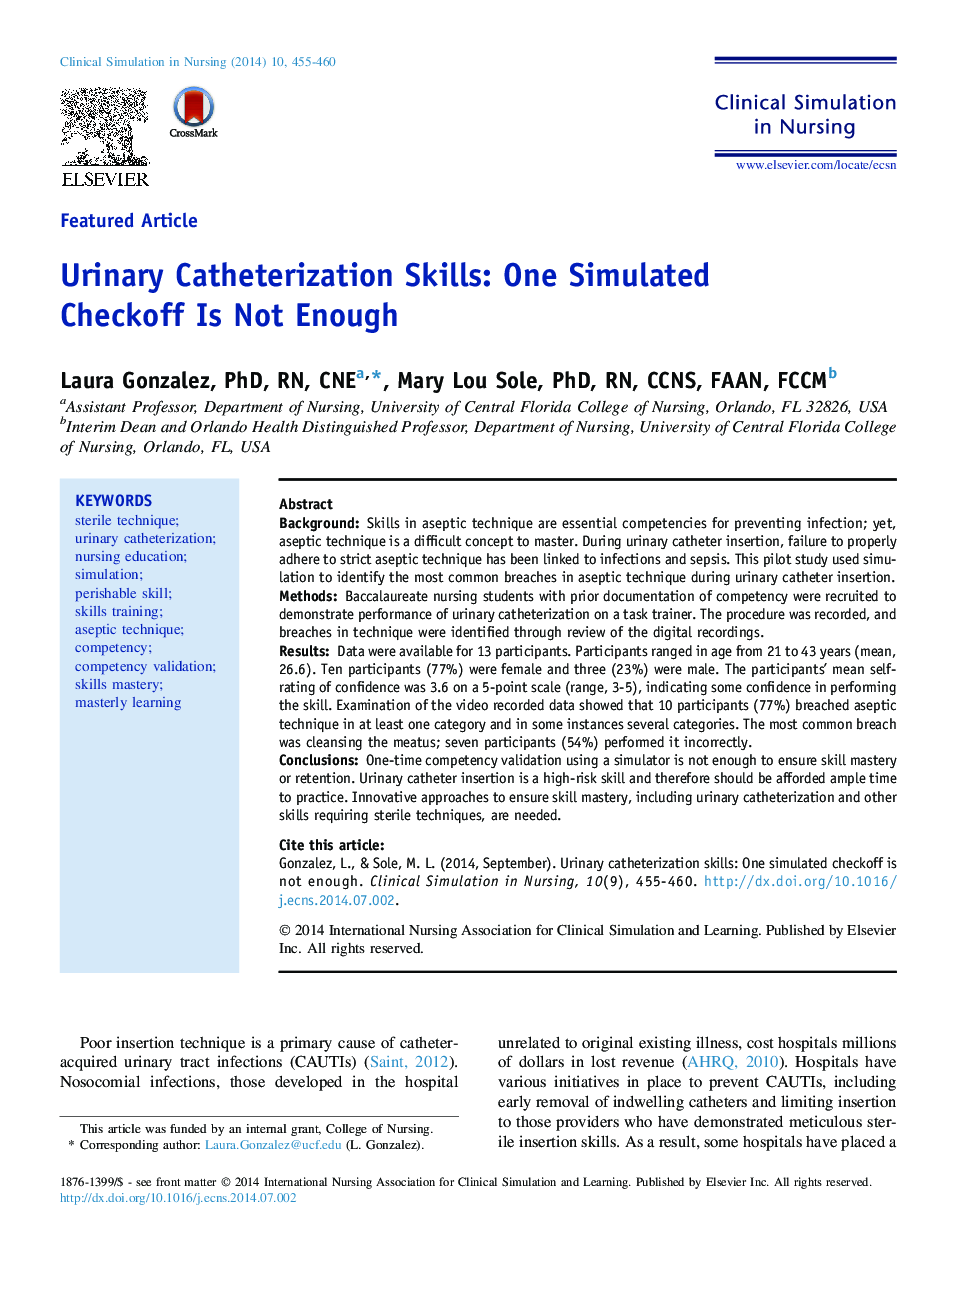 Urinary Catheterization Skills: One Simulated Checkoff Is Not Enough 